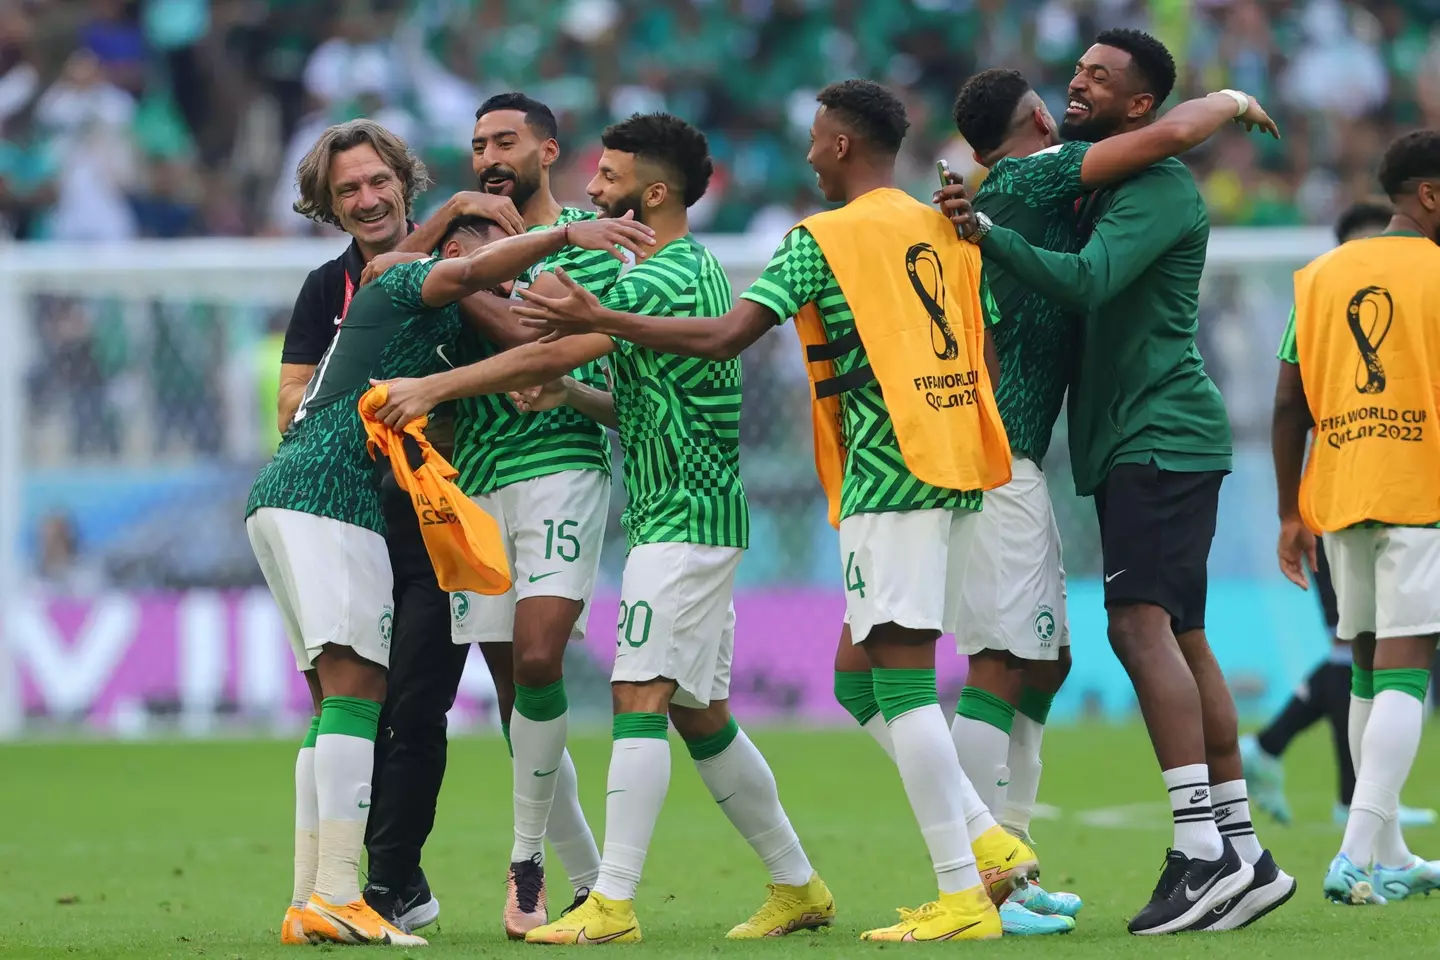 Saudi players celebrate at the full-time whistle. (Image